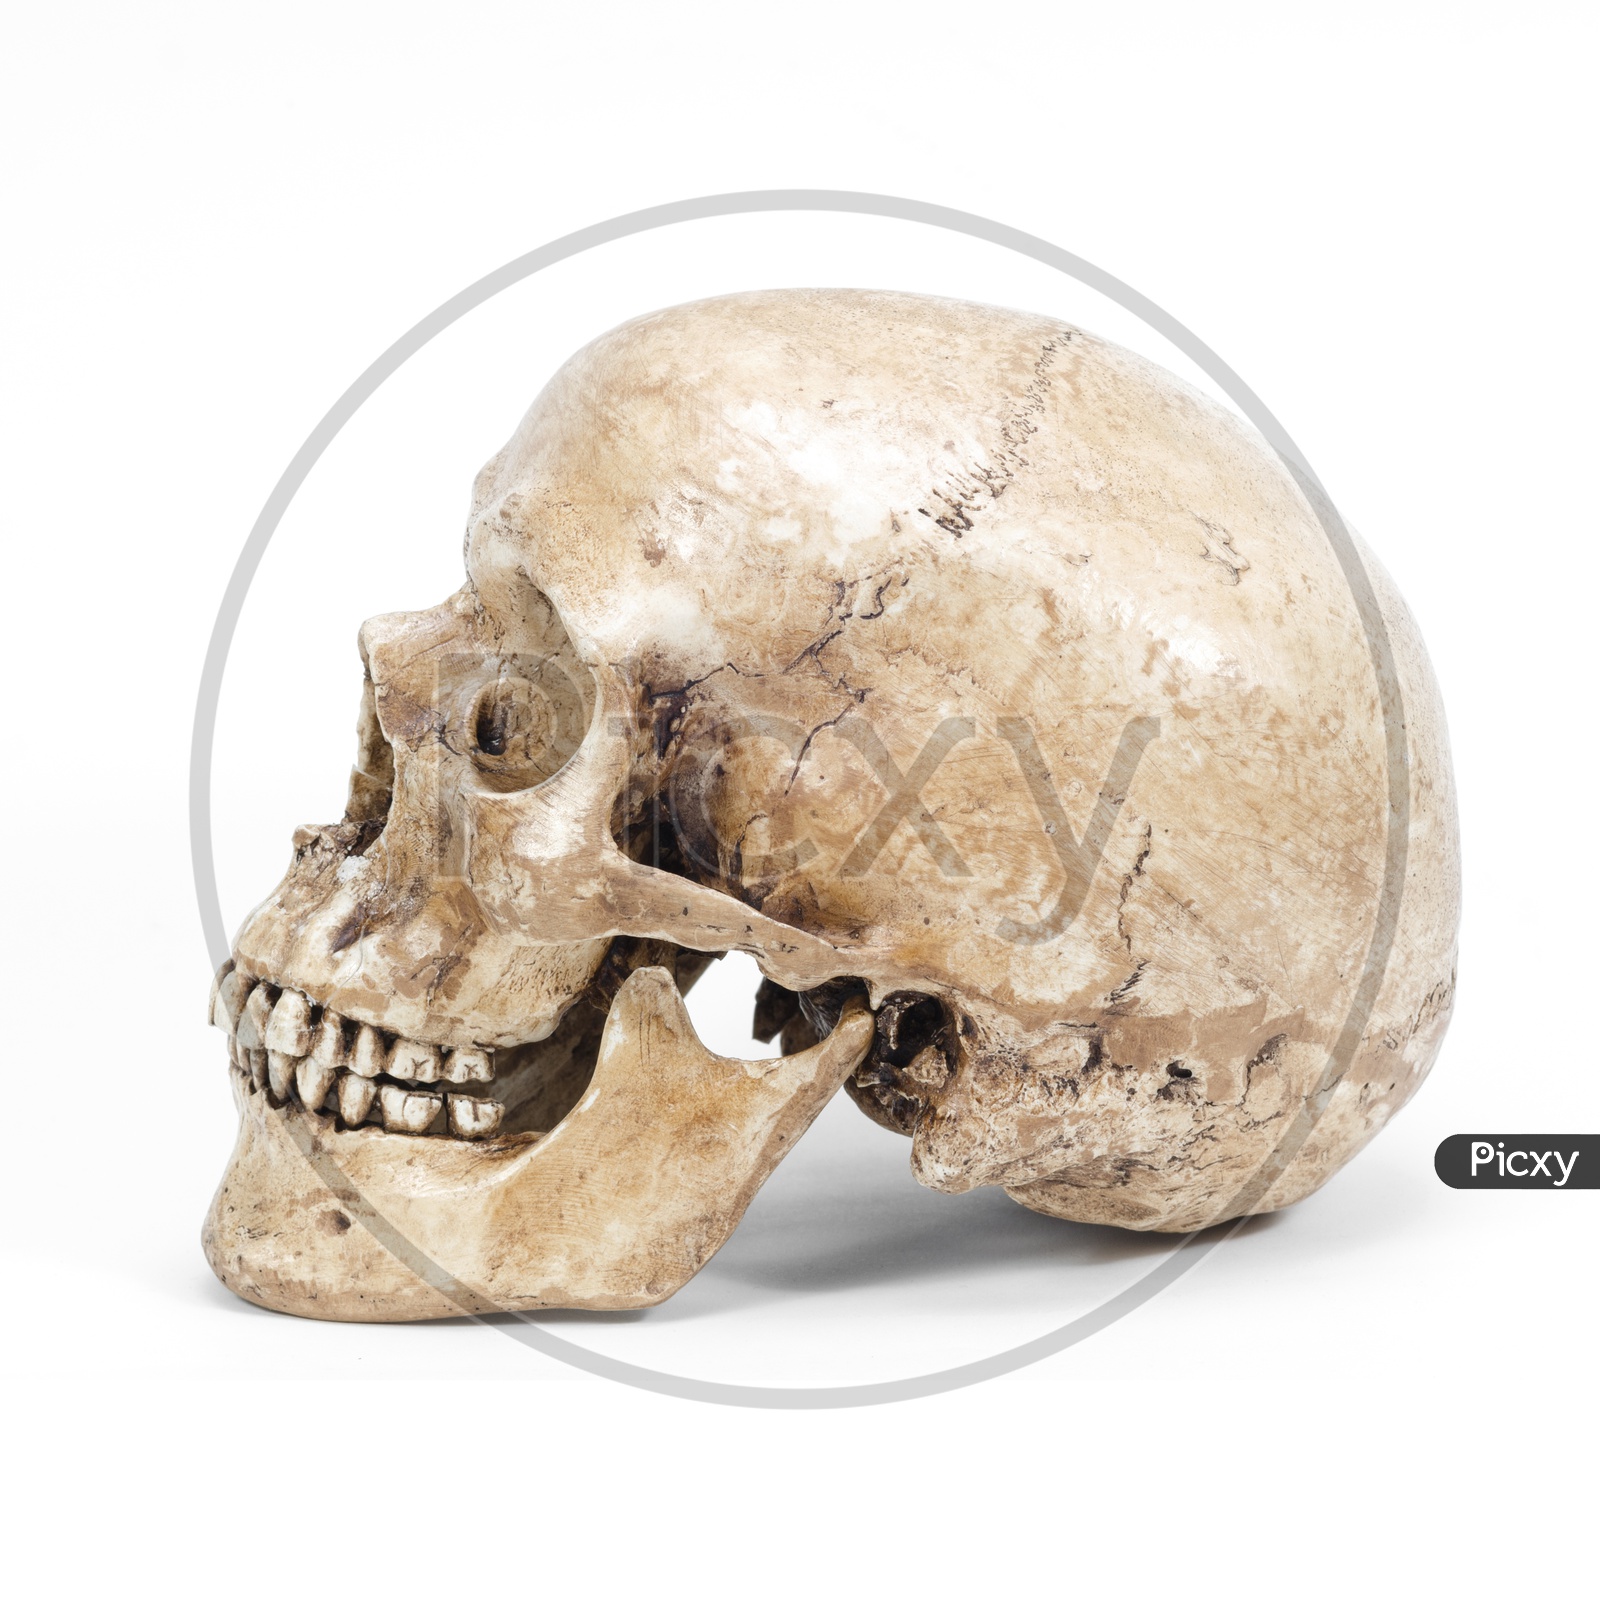 Side View of Human skull isolated on white background